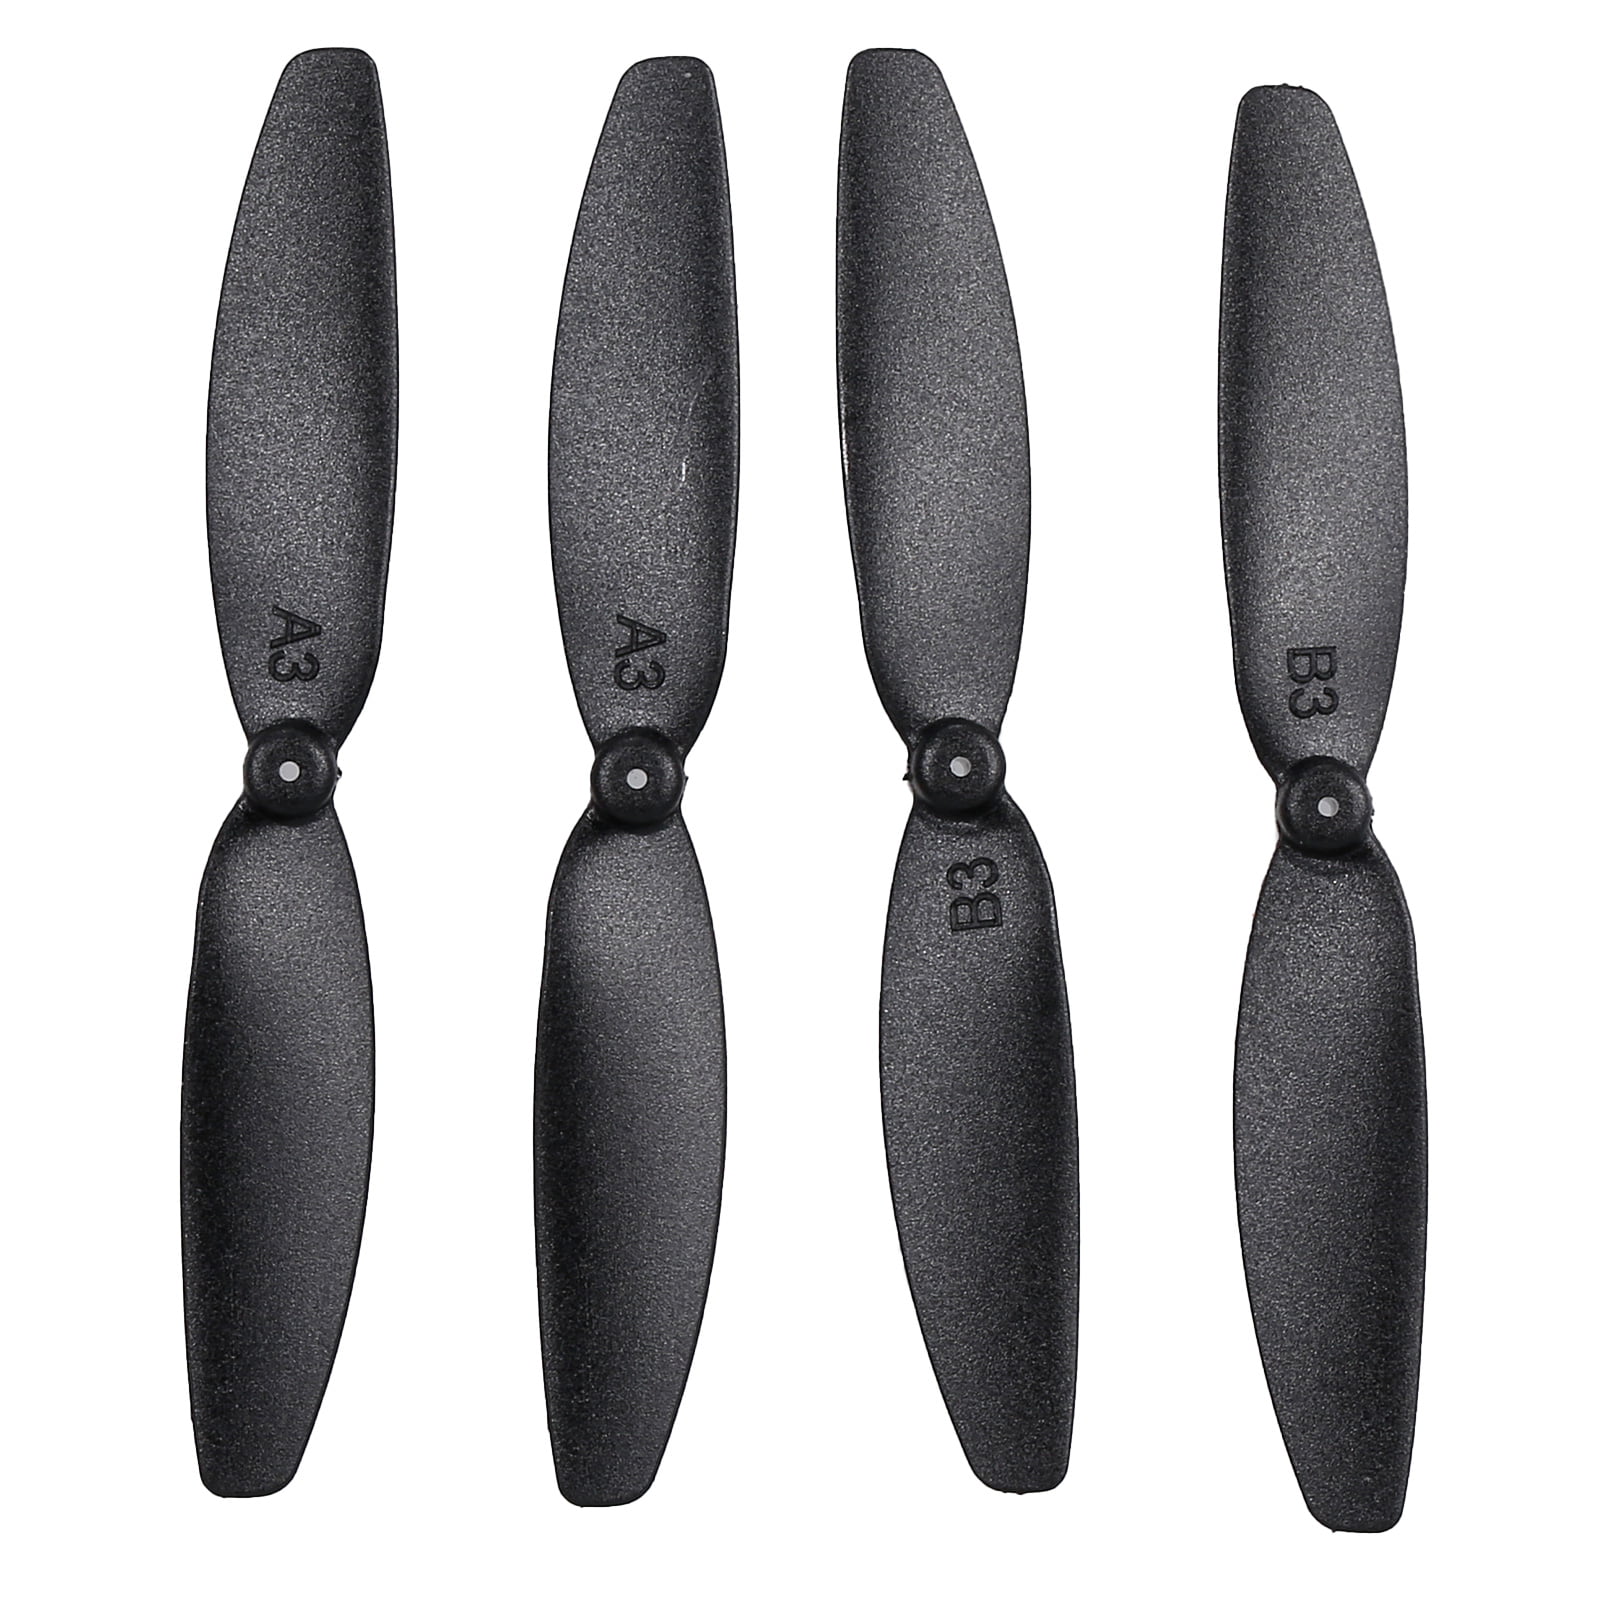 Zootealy 4pcs Propellers Spare Blades for H2 RC Drone Accessories